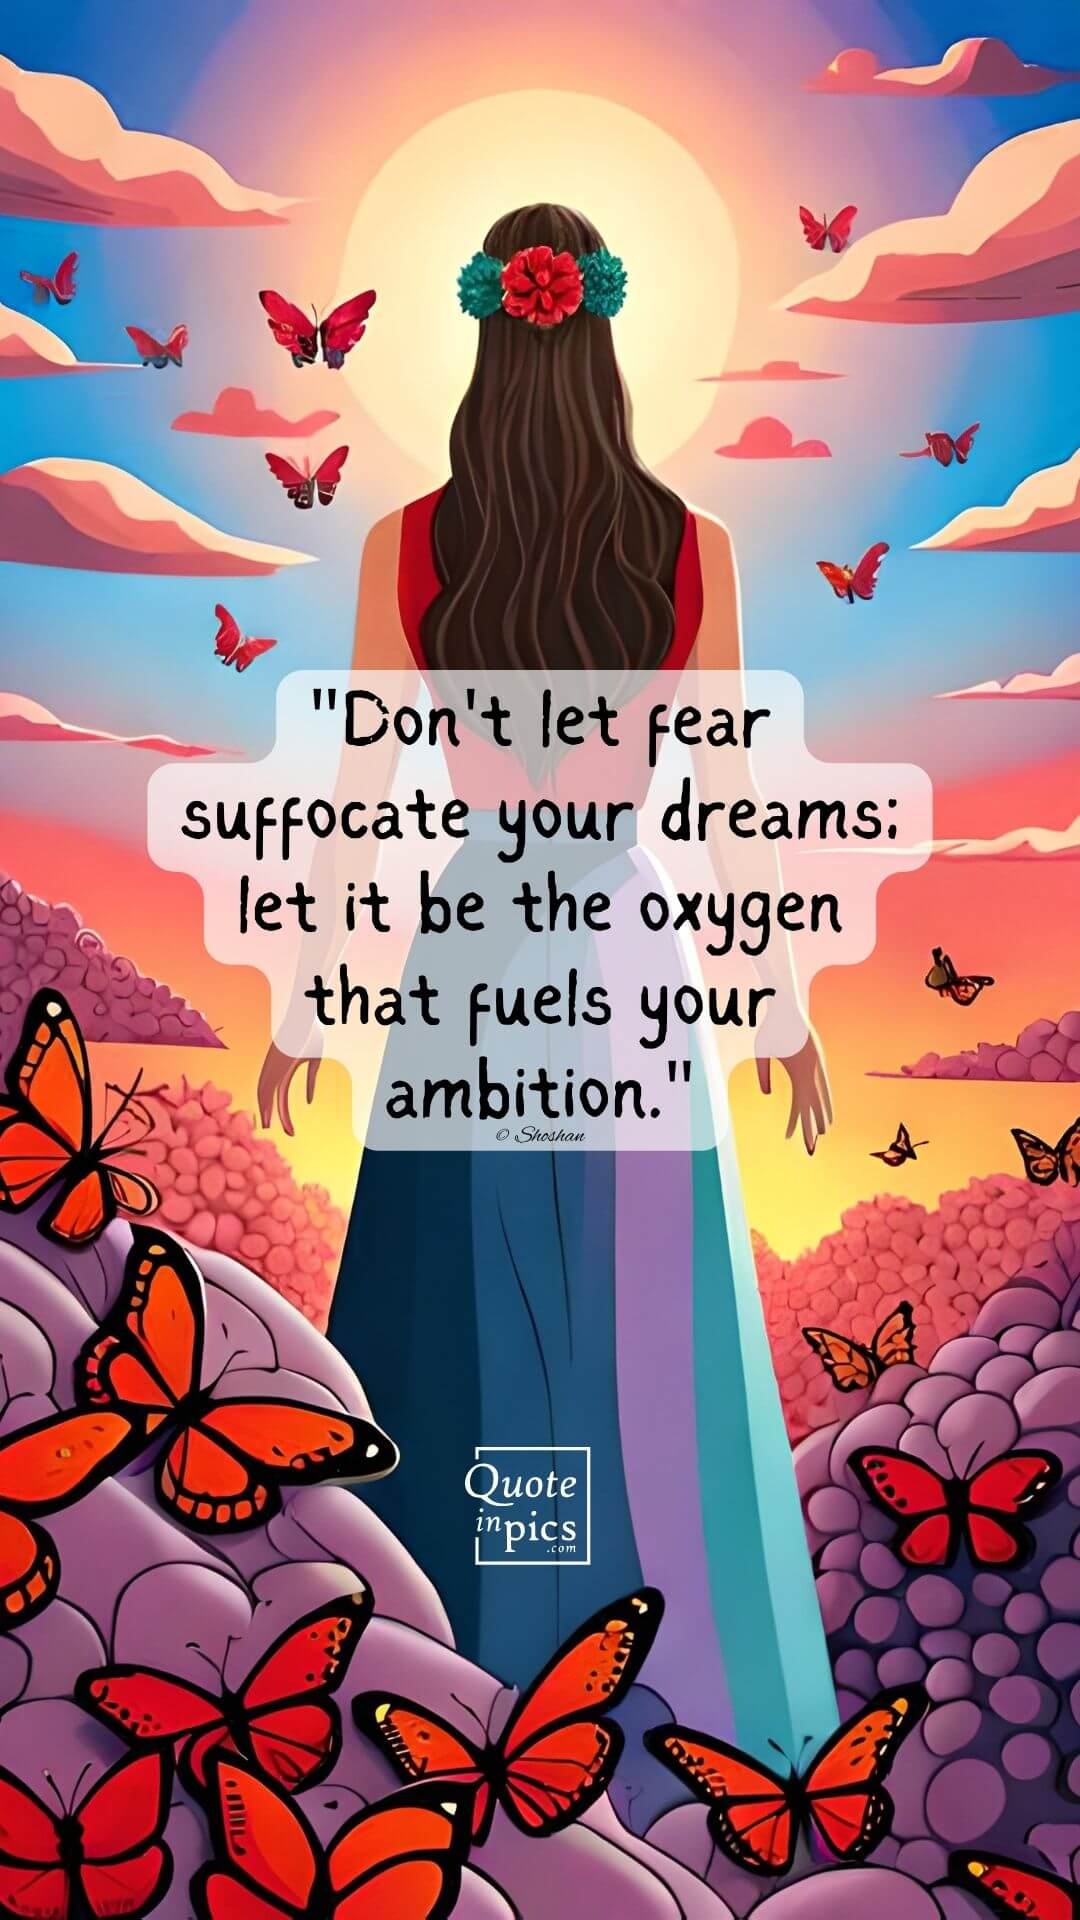 Don't let fear suffocate your dreams; let it be the oxygen that fuels your ambition